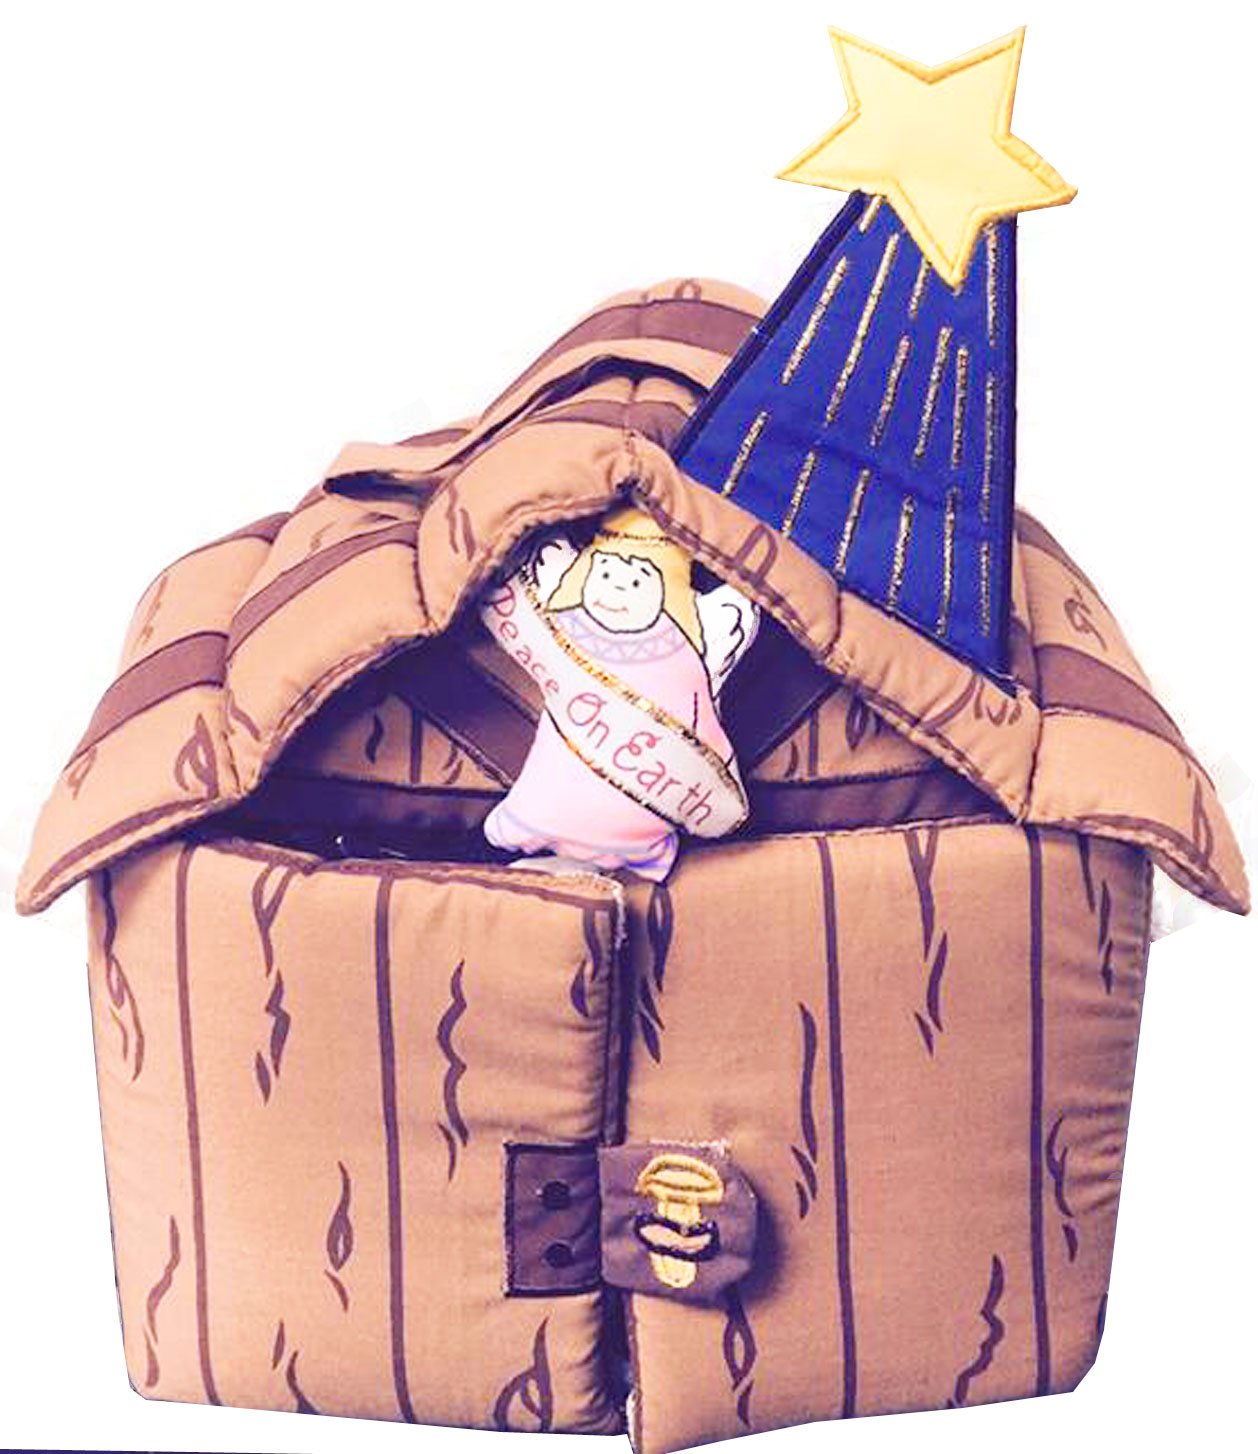 Nativity House Manger by Pockets of Learning